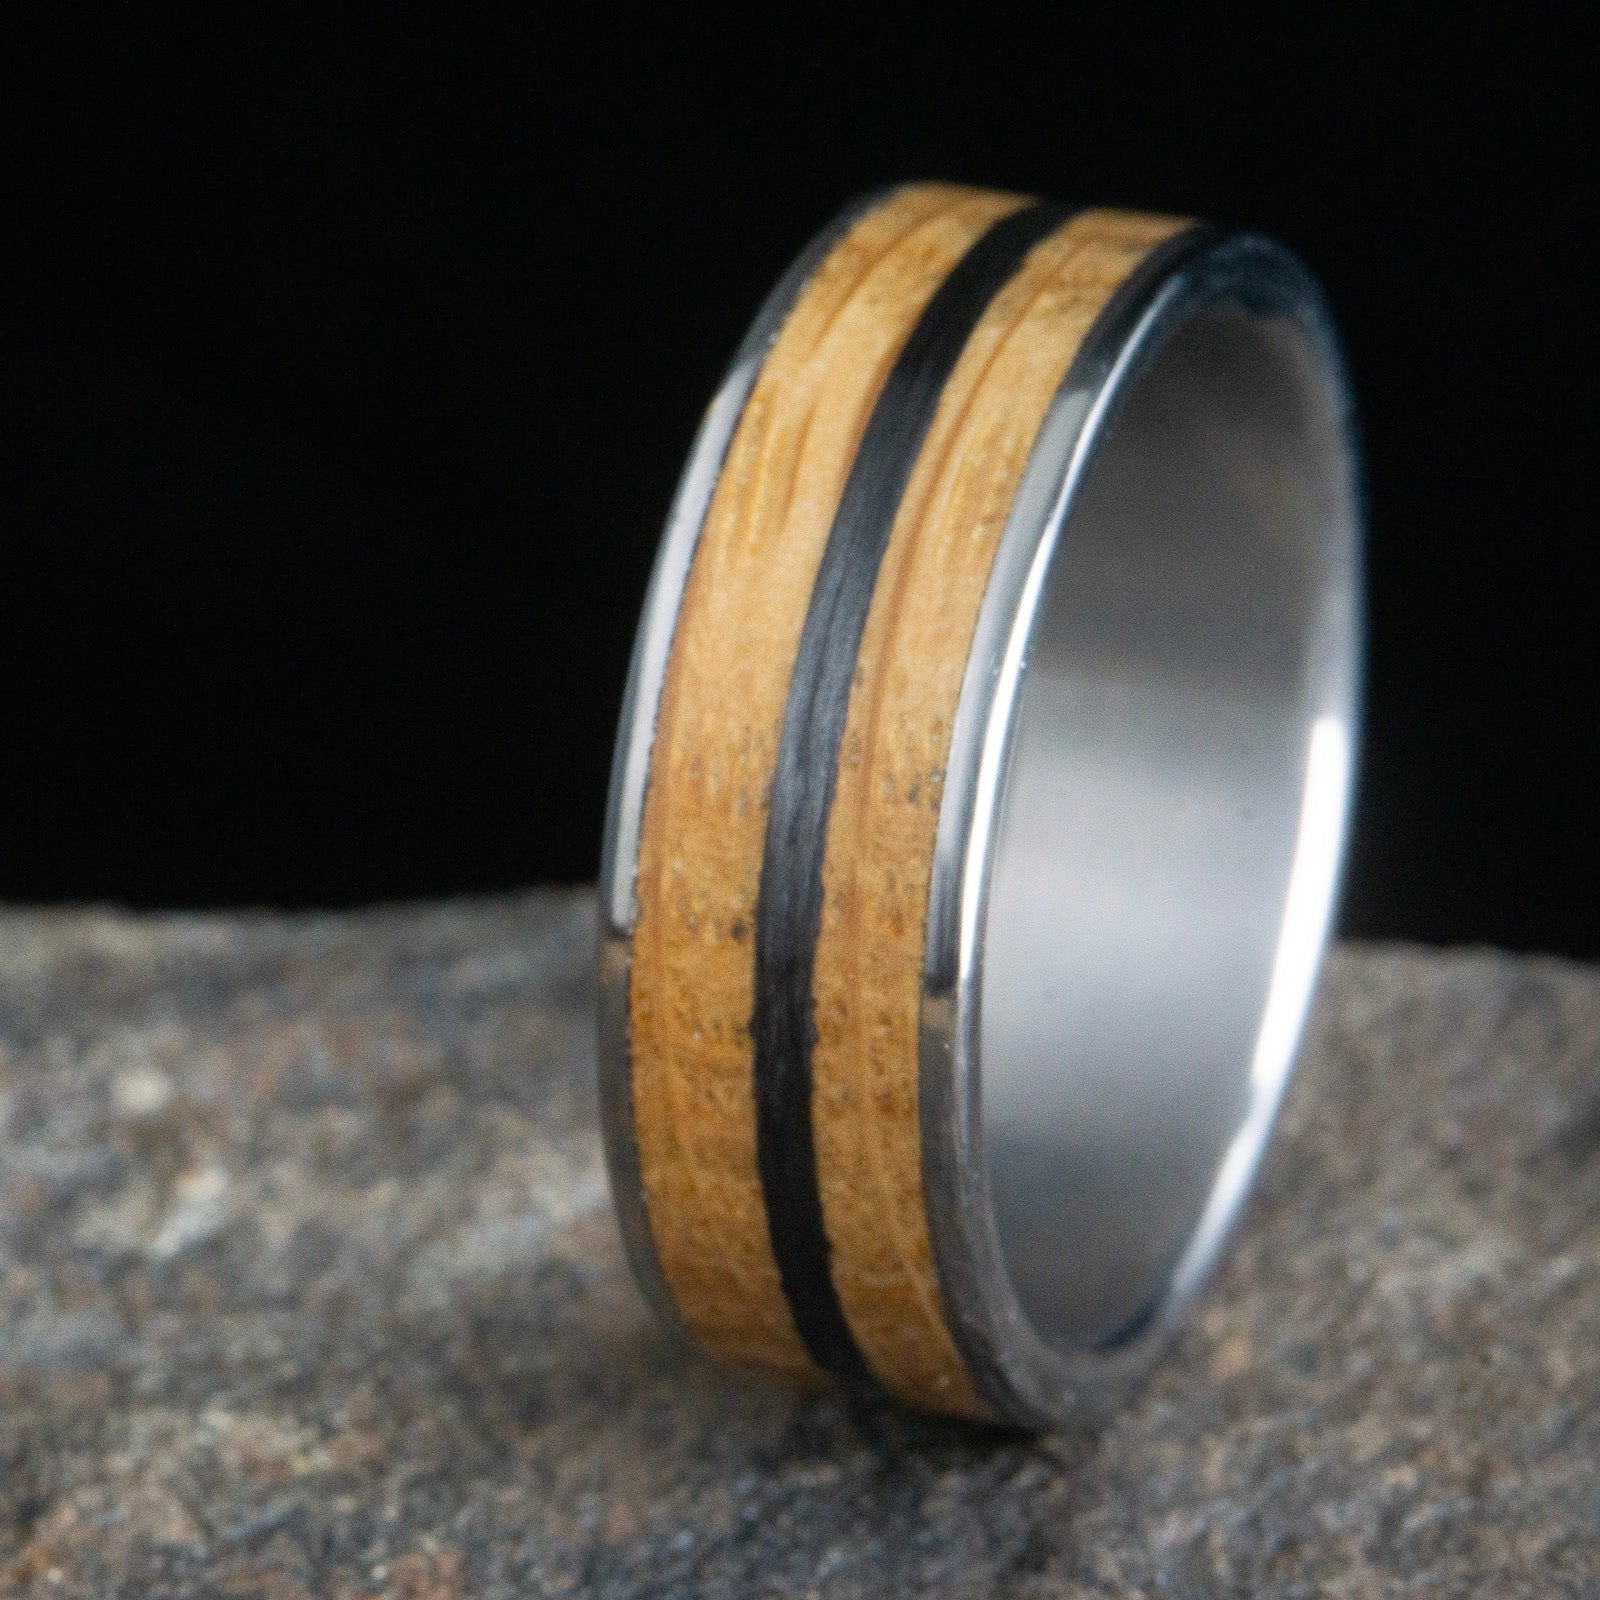 carbon fiber and whiskey barrel wood ring